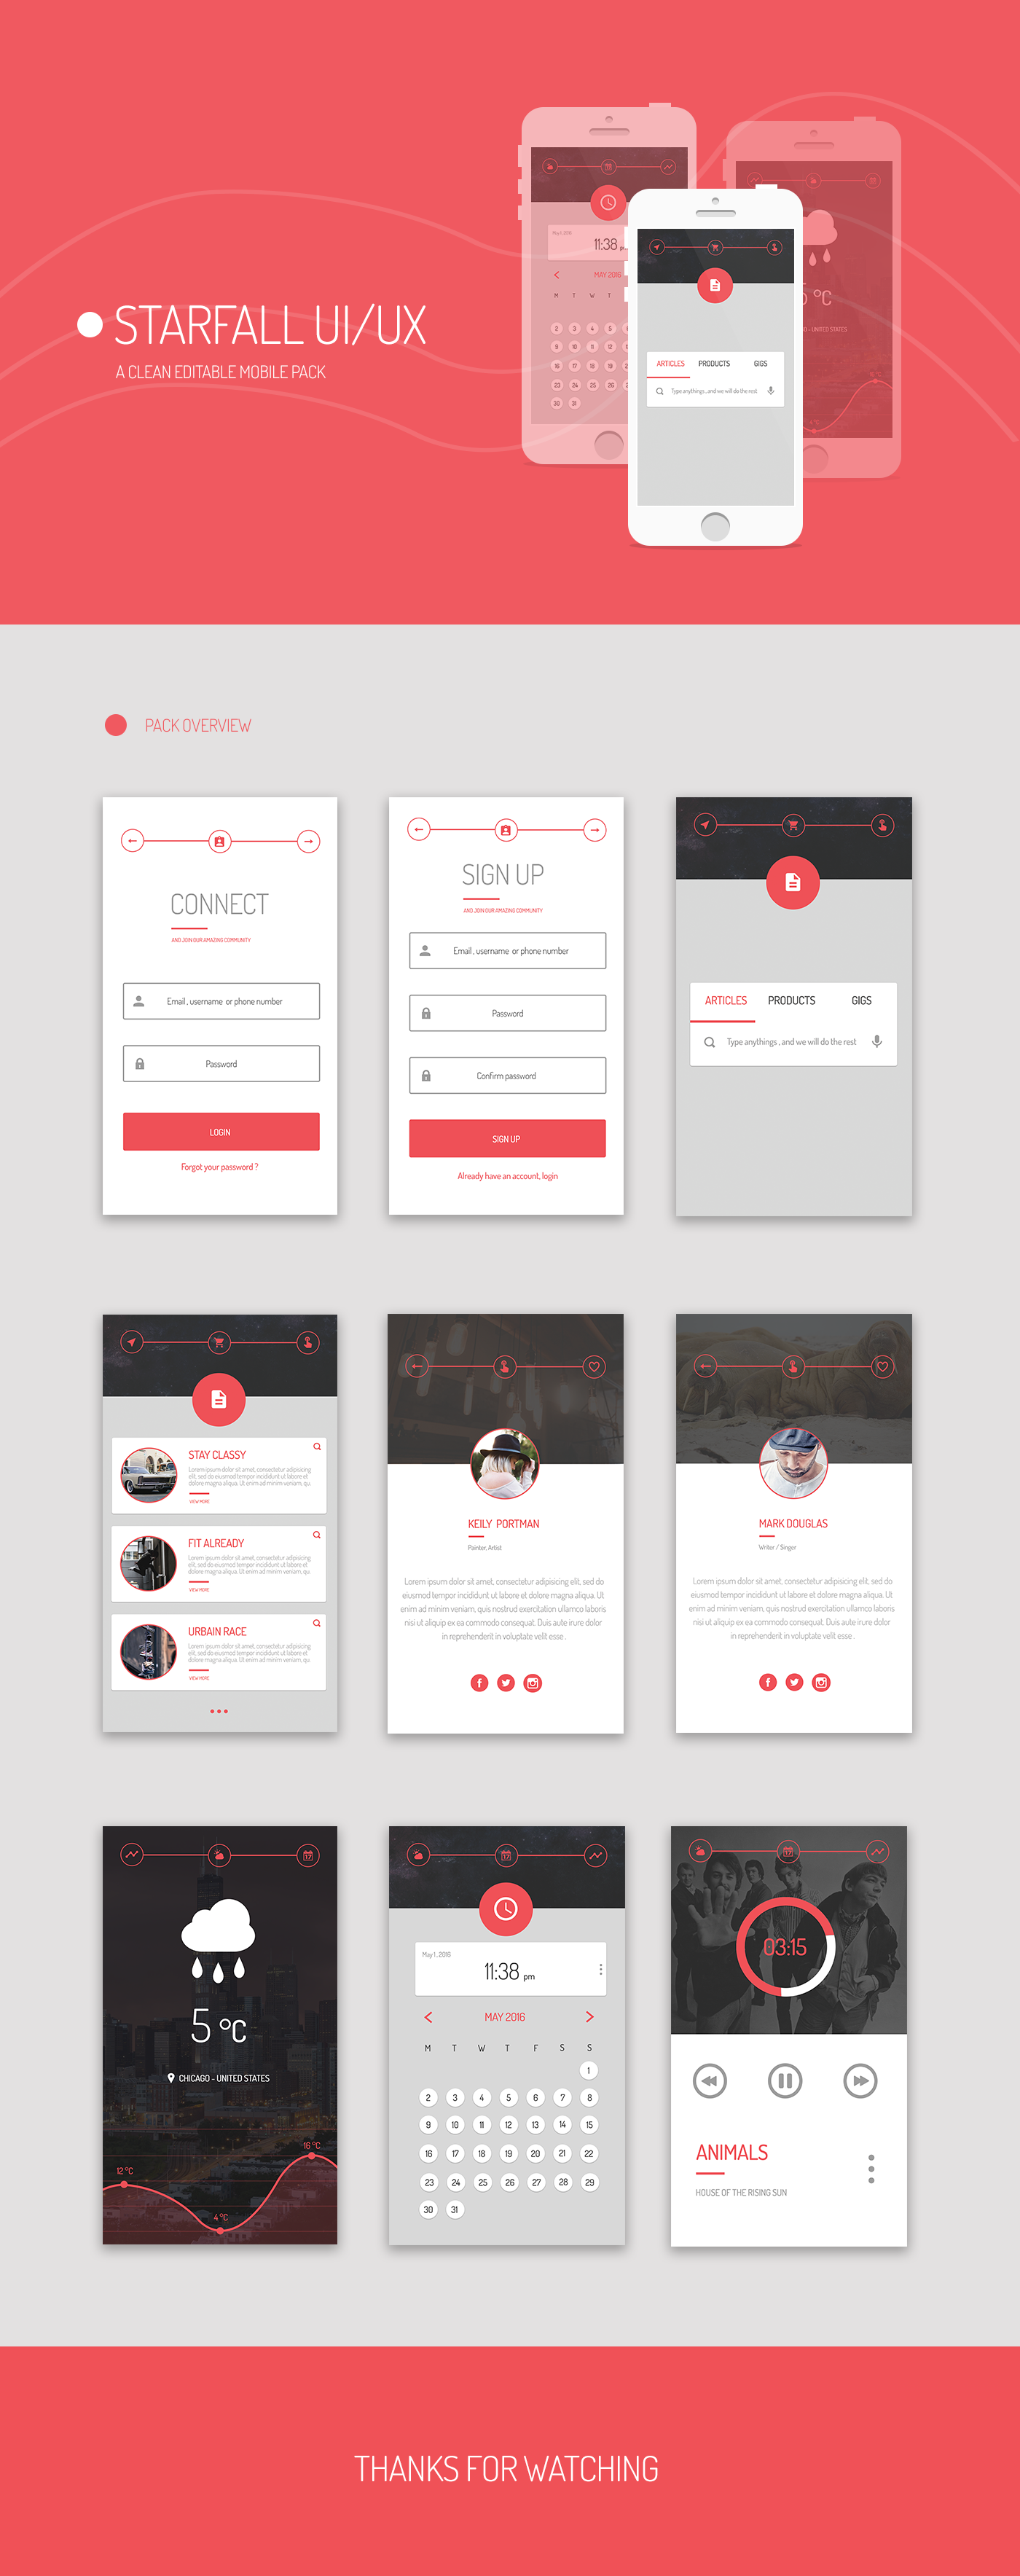 mobile UI ux free Pack design download starfall